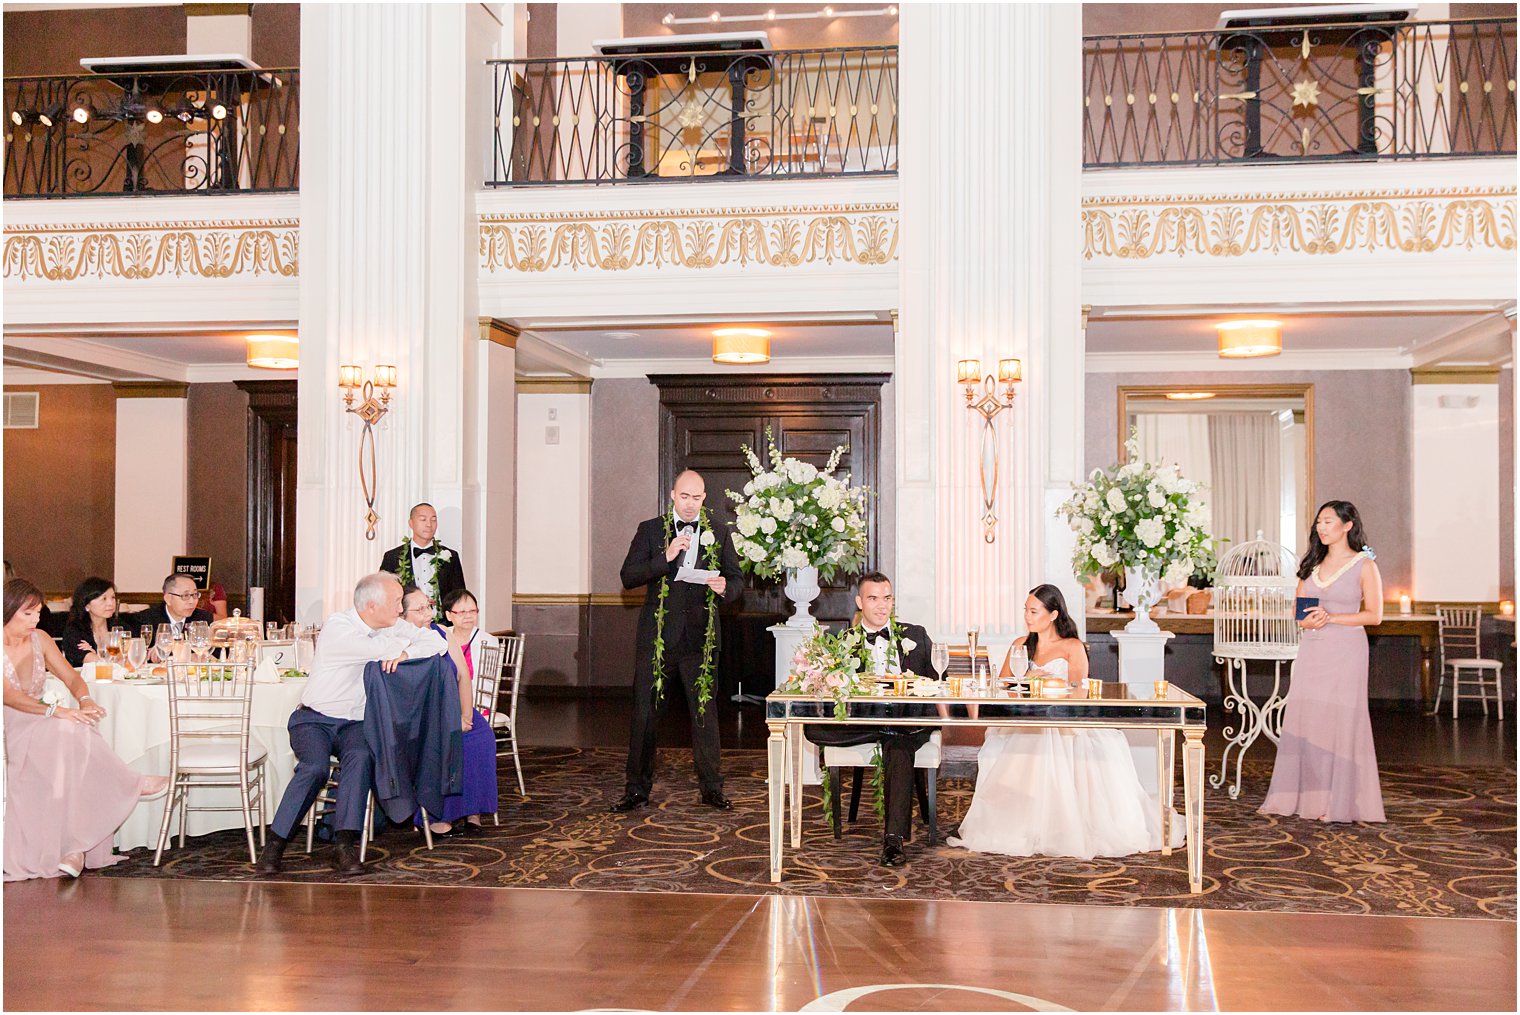 groomsman reads speech to bride and groom during wedding reception 